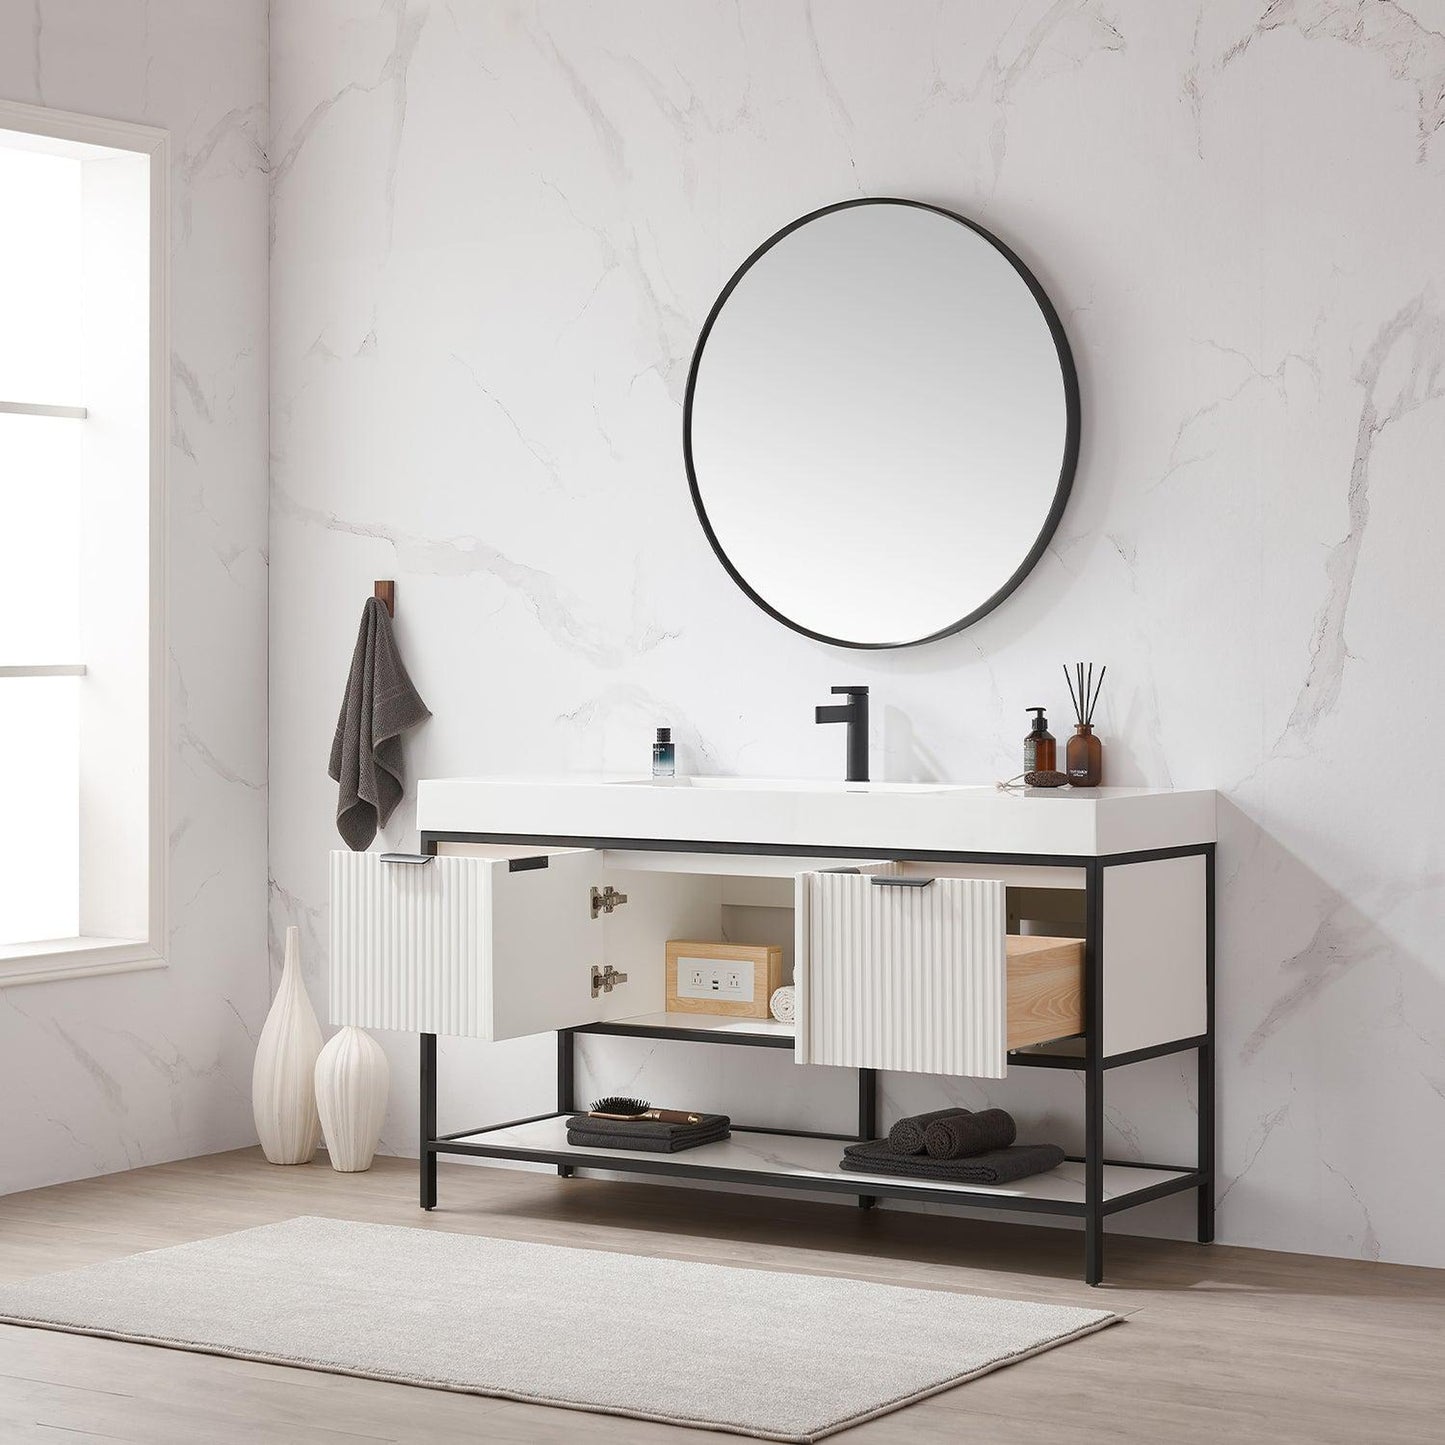 Vinnova Marcilla 60" Single Sink Bath Vanity In White With One-Piece Composite Stone Sink Top And Mirror